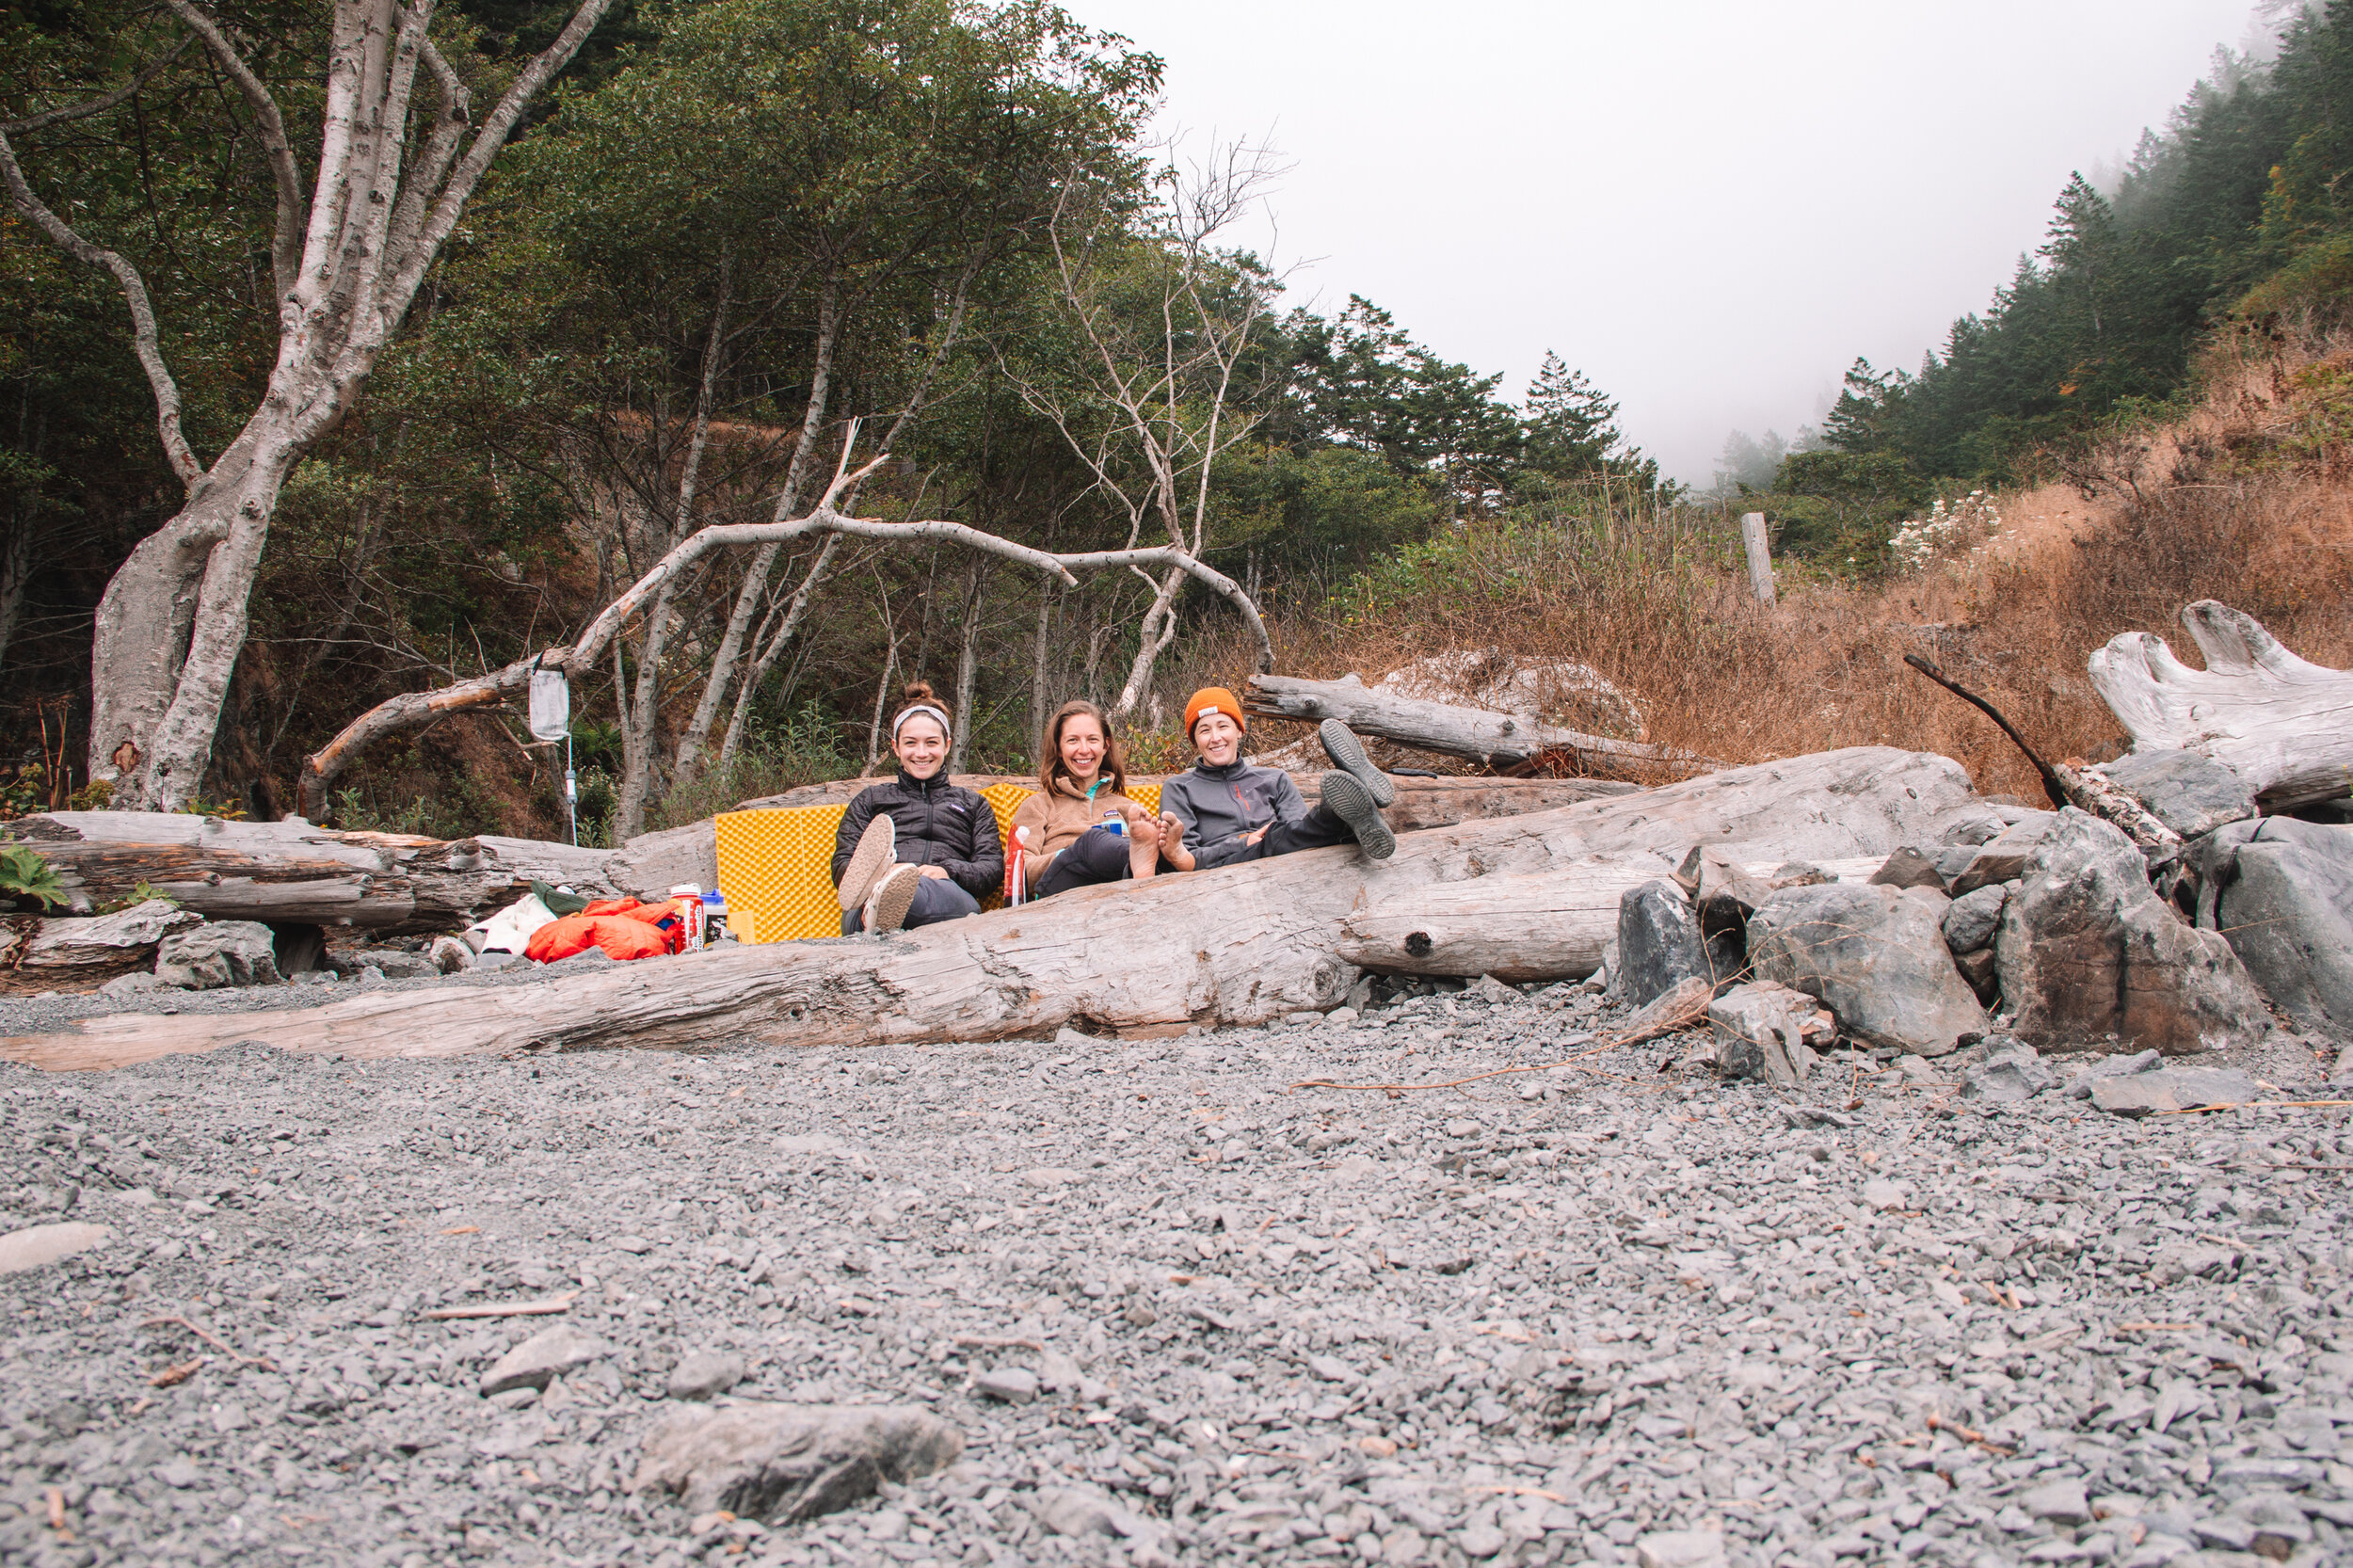 Enjoying the sunset at Buck Creek Campsite on the Lost Coast Trail